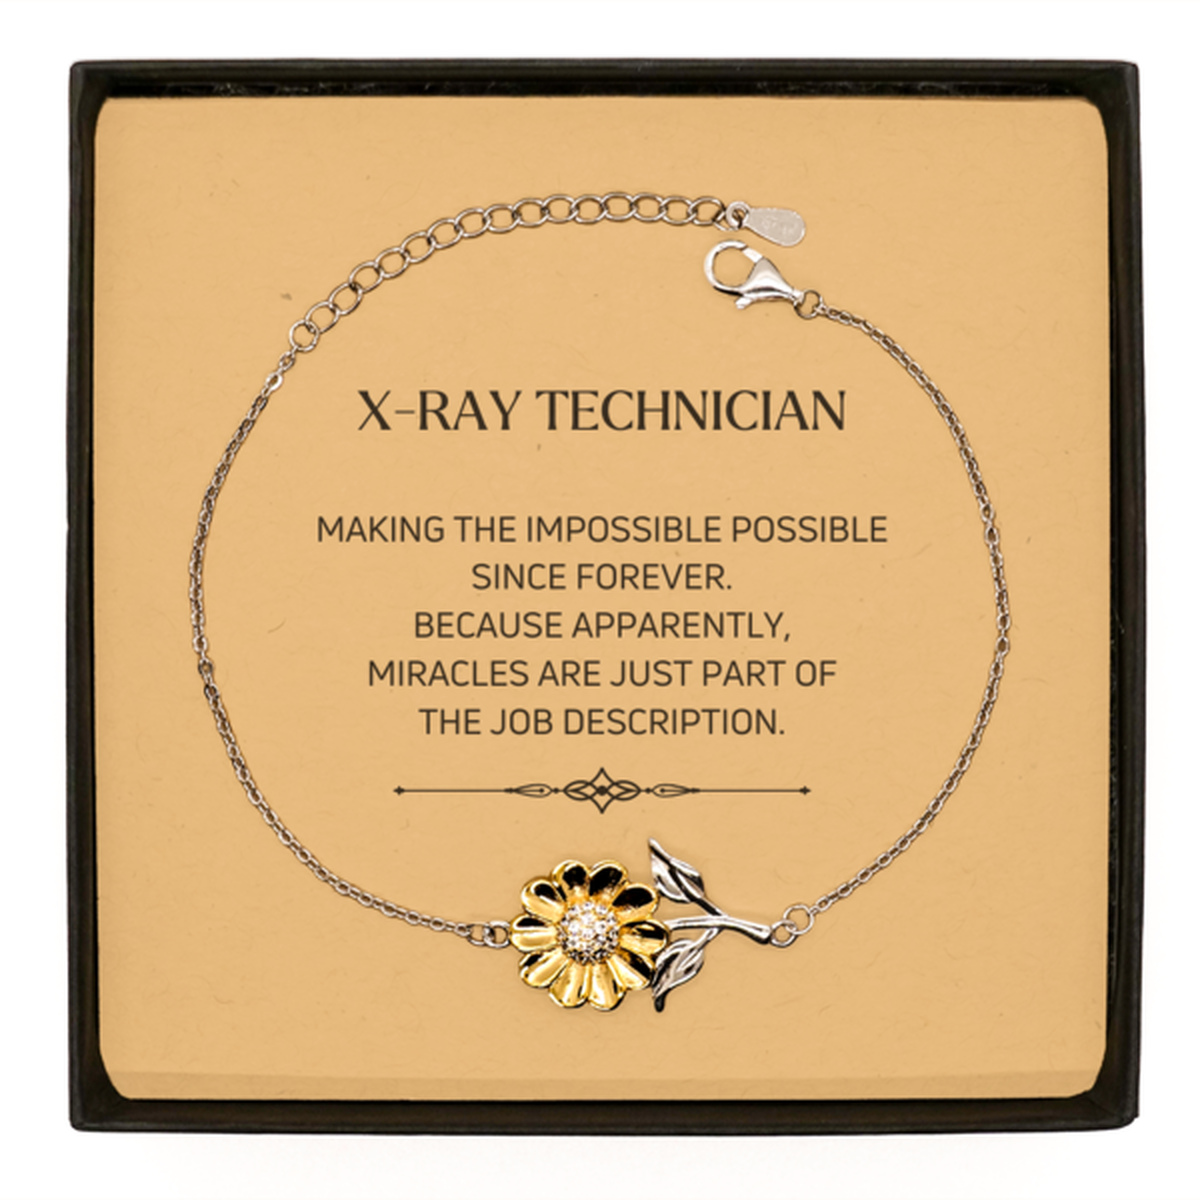 Funny X-Ray Technician Gifts, Miracles are just part of the job description, Inspirational Birthday Sunflower Bracelet For X-Ray Technician, Men, Women, Coworkers, Friends, Boss